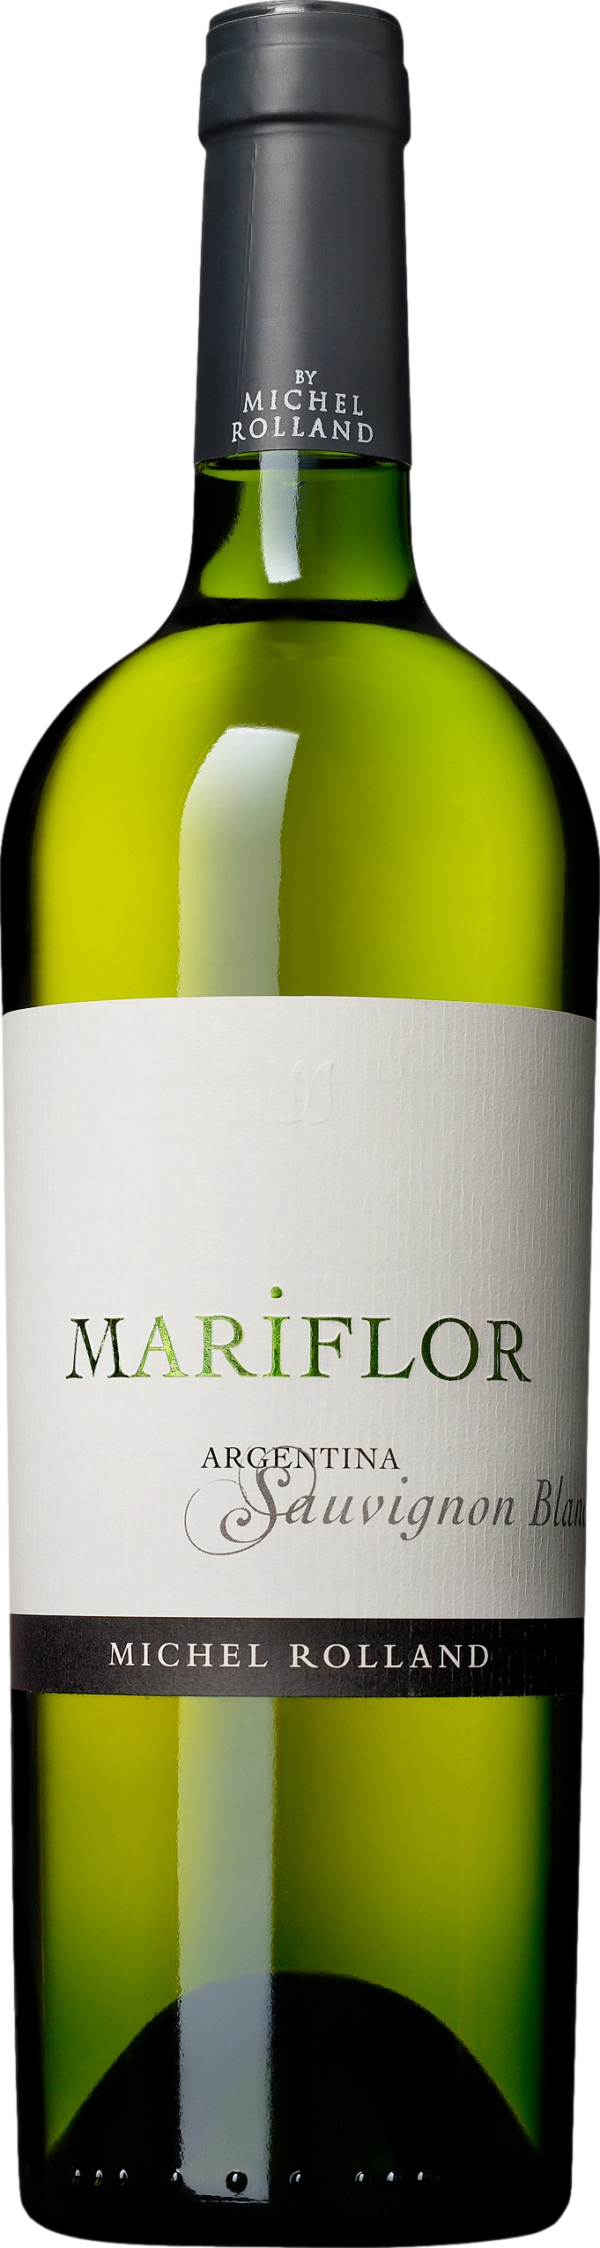 Product image of Michel Rolland Mariflor Sauvignon Blanc 2018 from 8wines